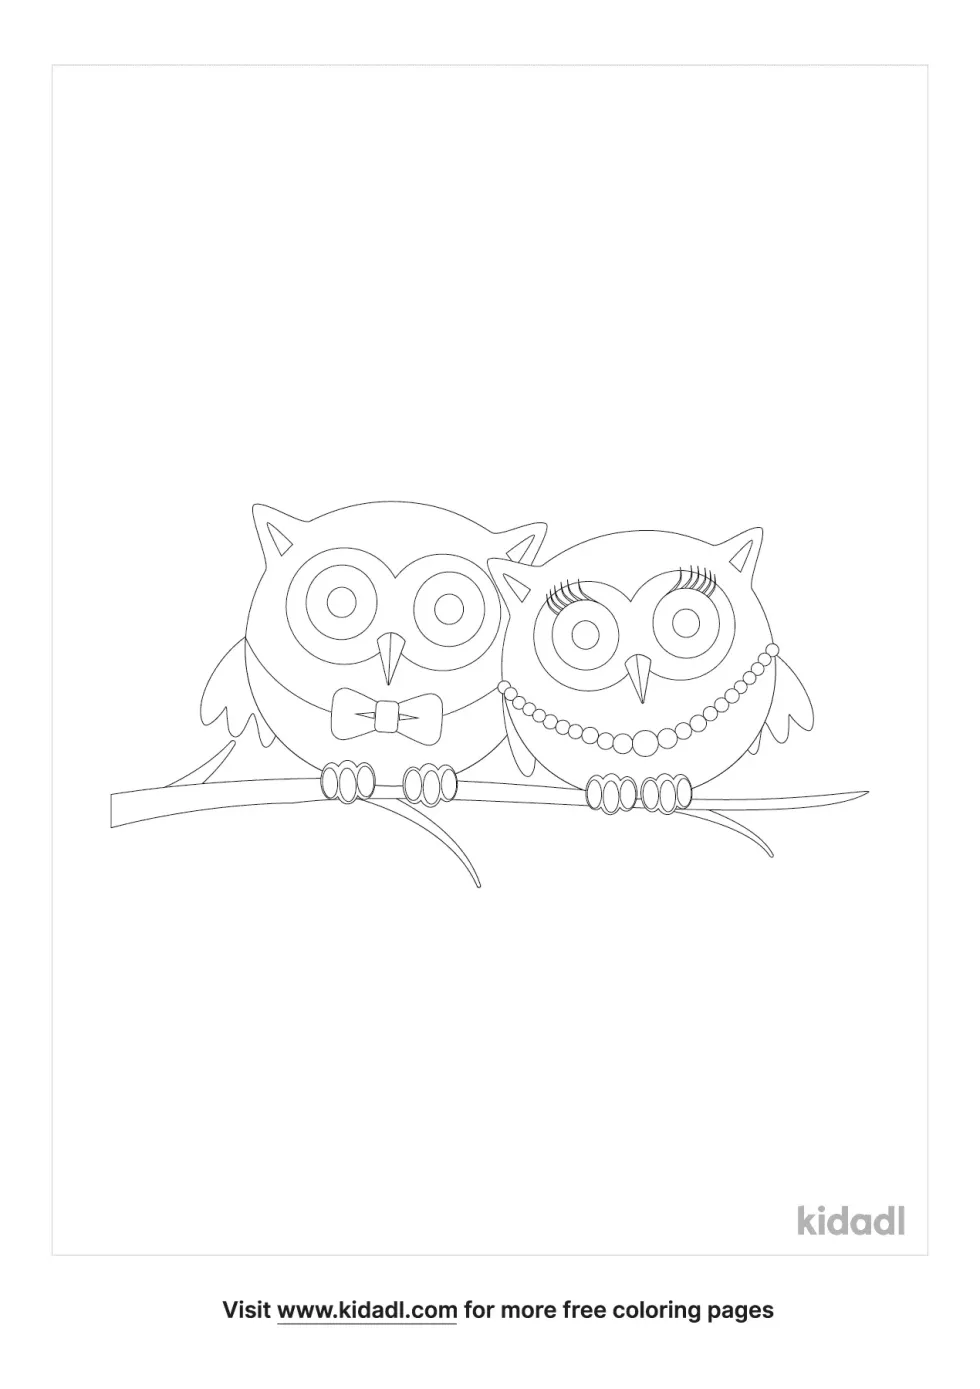 Two Owls Coloring Page